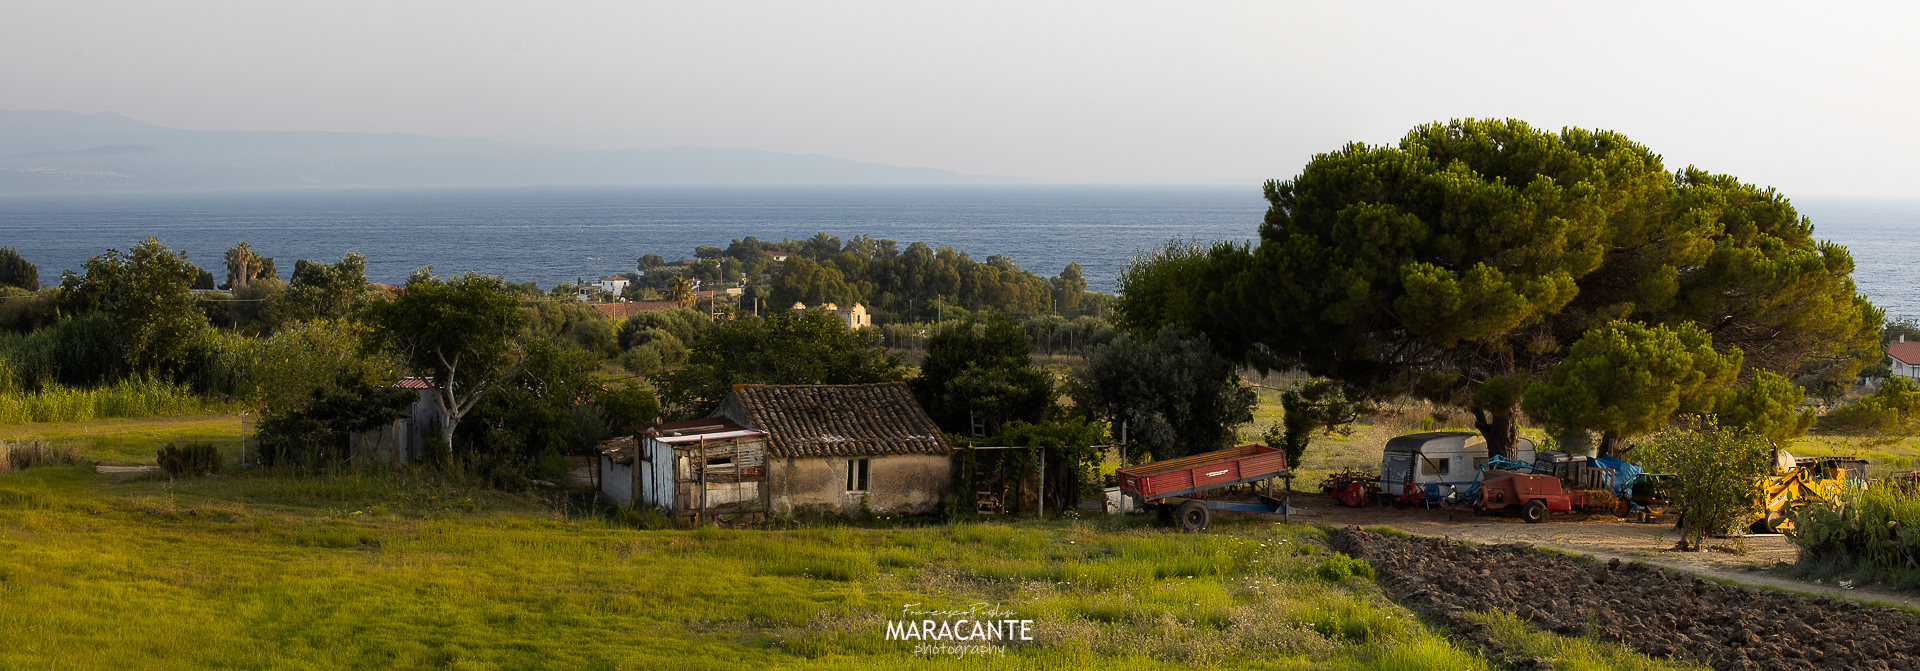 Calabrian landscapes...